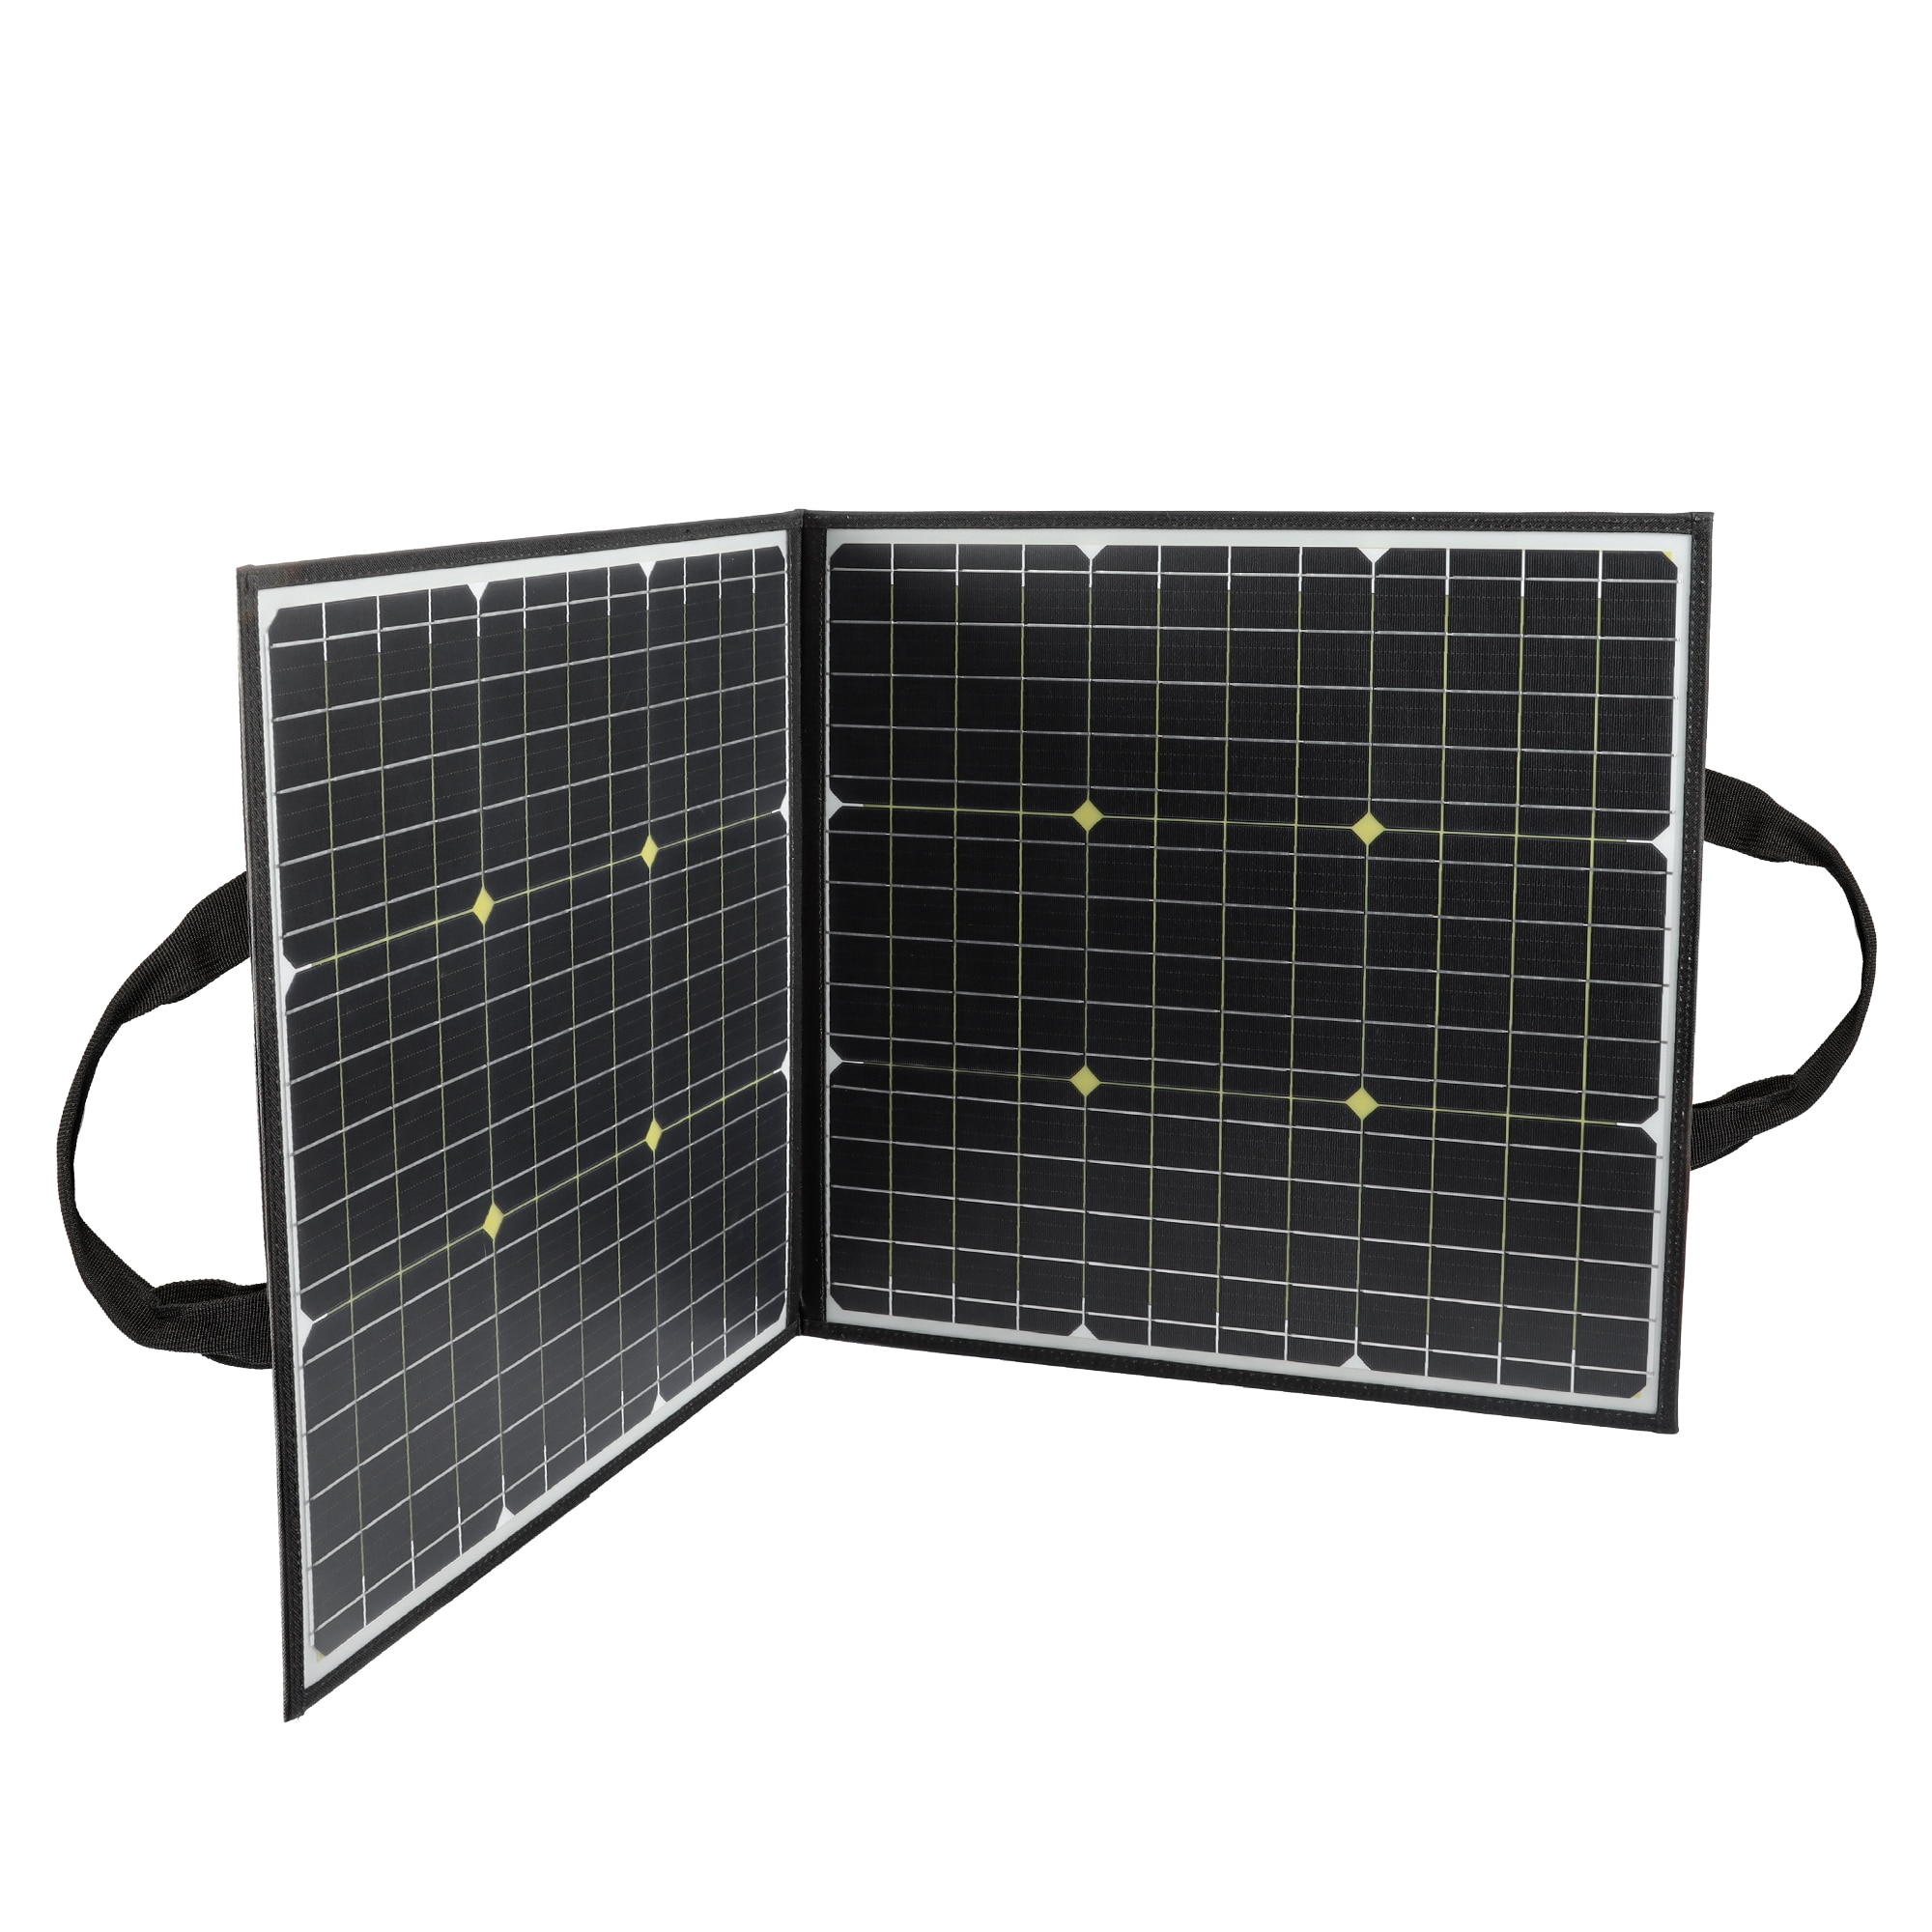 Flashfish Portable Solar Panel 100W 18V Foldable Solar Cells 5V Dual USB Battery Charger Outdoor Power Supply Camping Travel